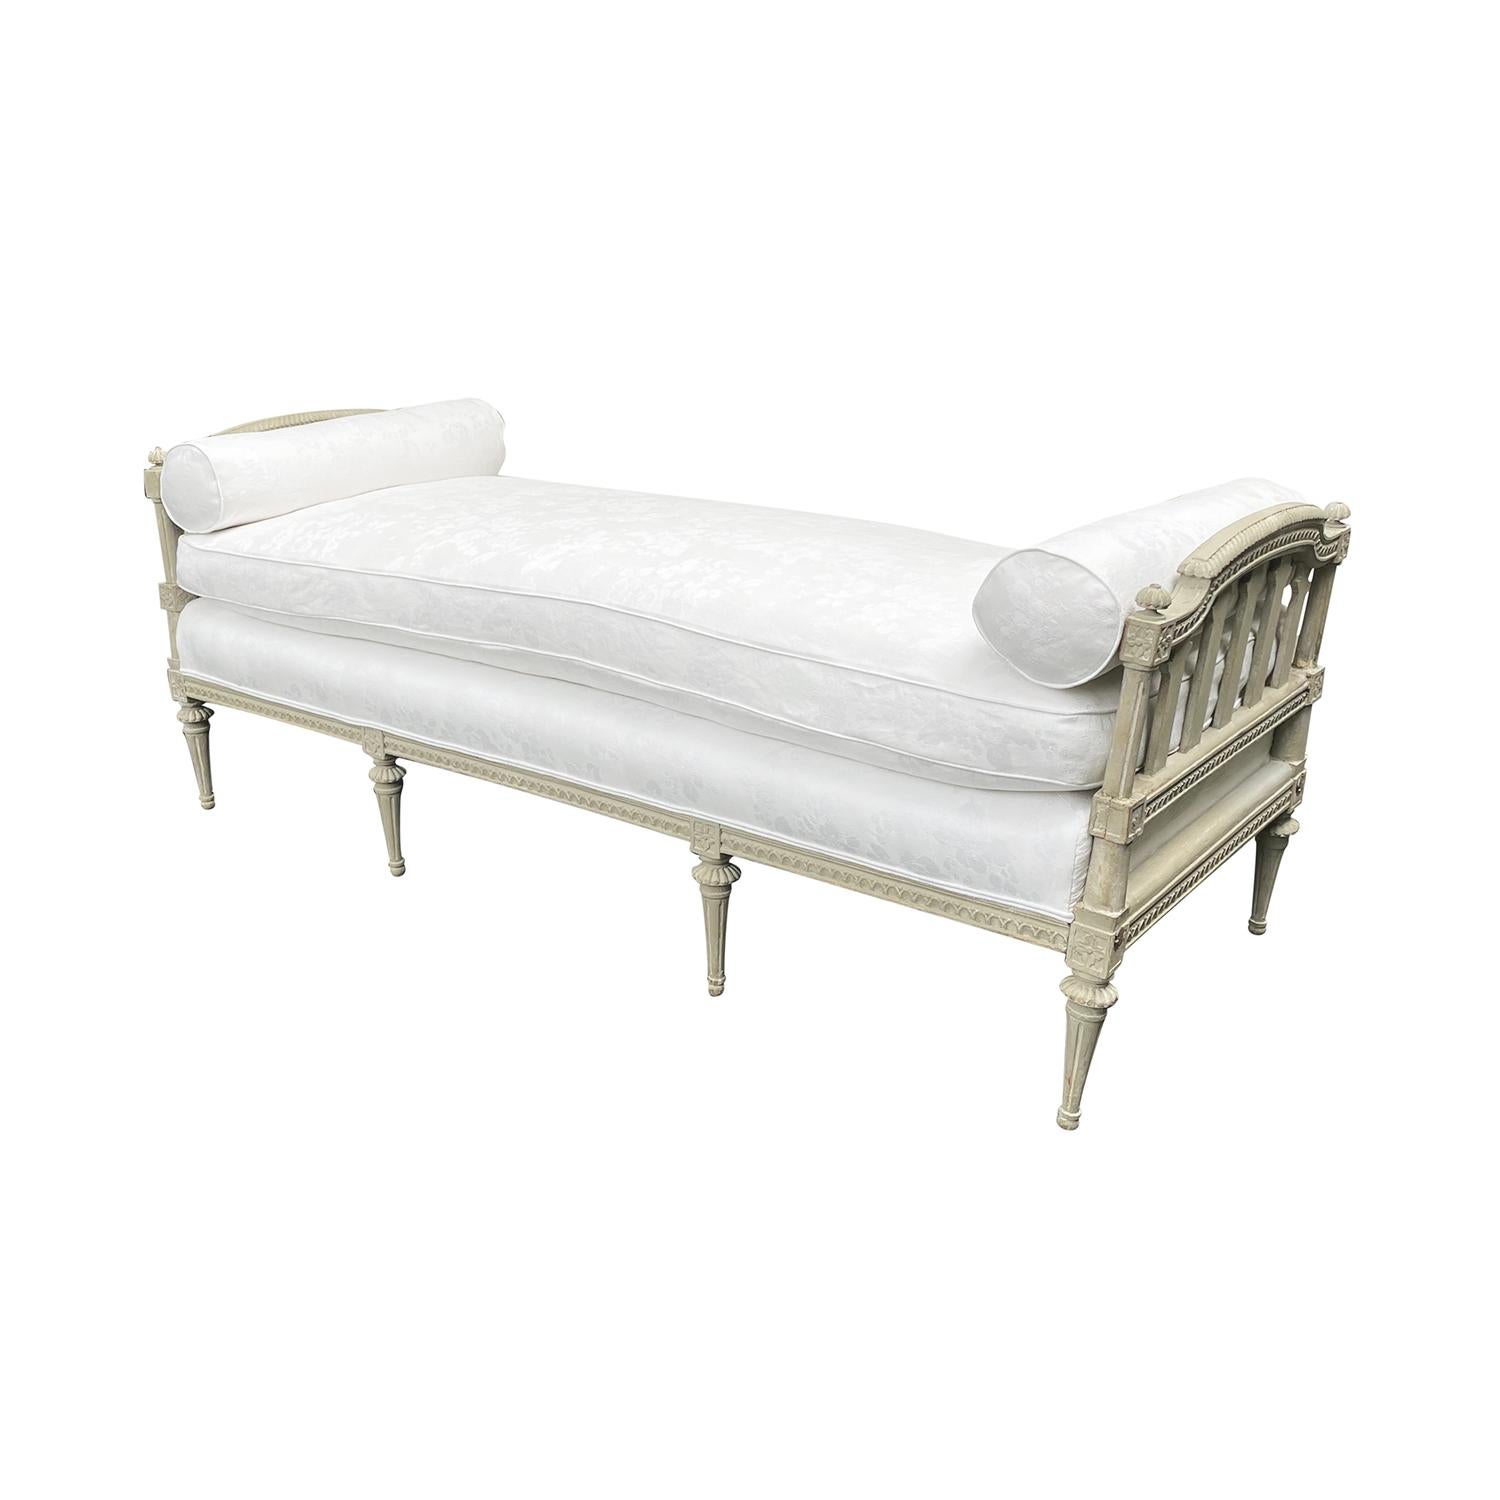 Cotton 18th-19th Century White Swedish Gustavian Pinewood Daybed, Antique Sofa Bench For Sale